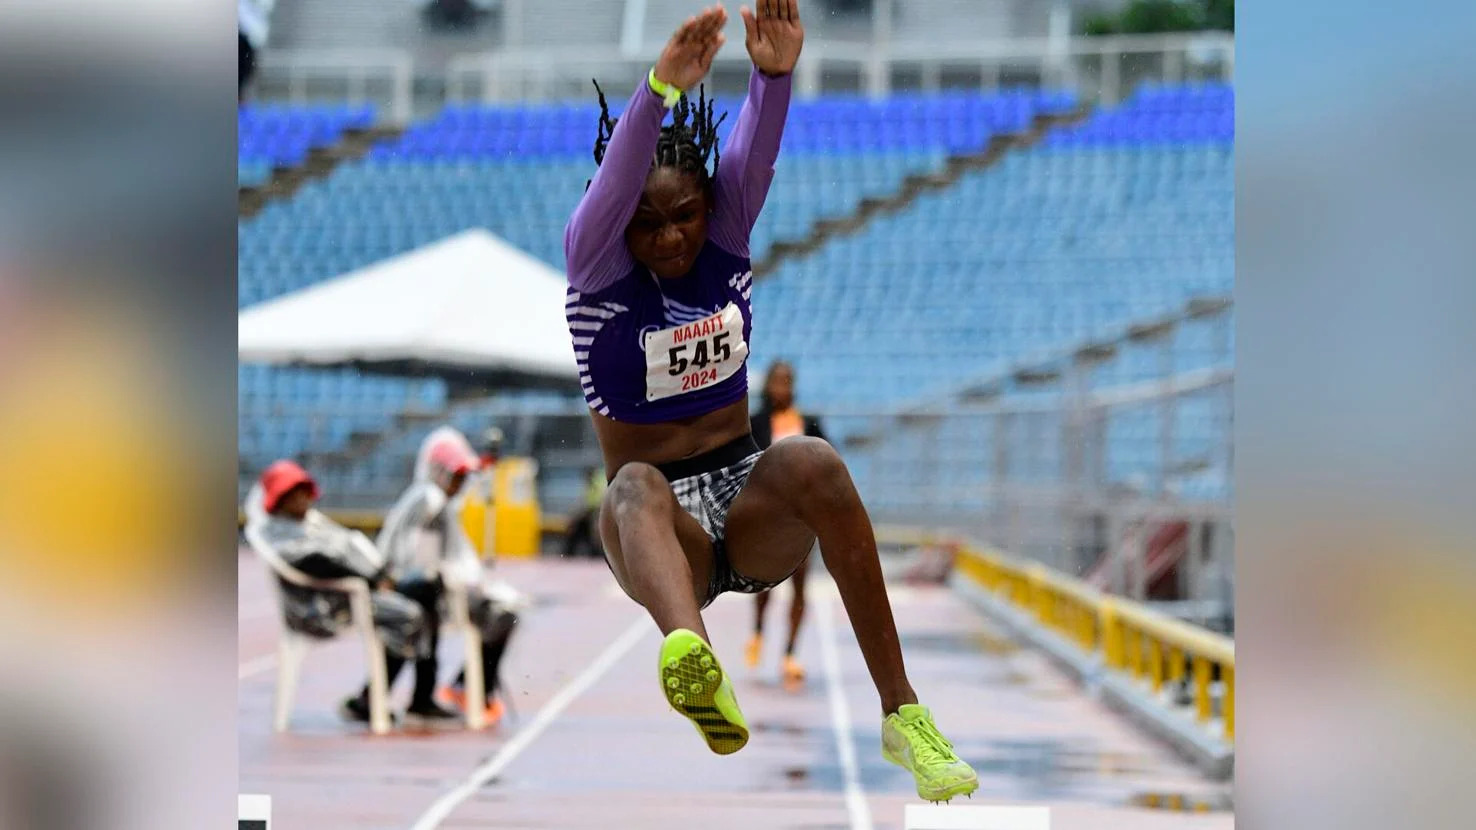 GOLDEN LEAP: Janae De Gannes leaps to victory in the Girls Under-20 long jump on day two of the NGC/NAAATT National Championships at the Hasely Crawford Stadium, in Port of Spain, on Saturday. De Gannes disturbed the sand at 6.22 metres.  —Photo: DENNIS ALLEN for @TTGameplan (Image obtained at trinidadexpress.com)